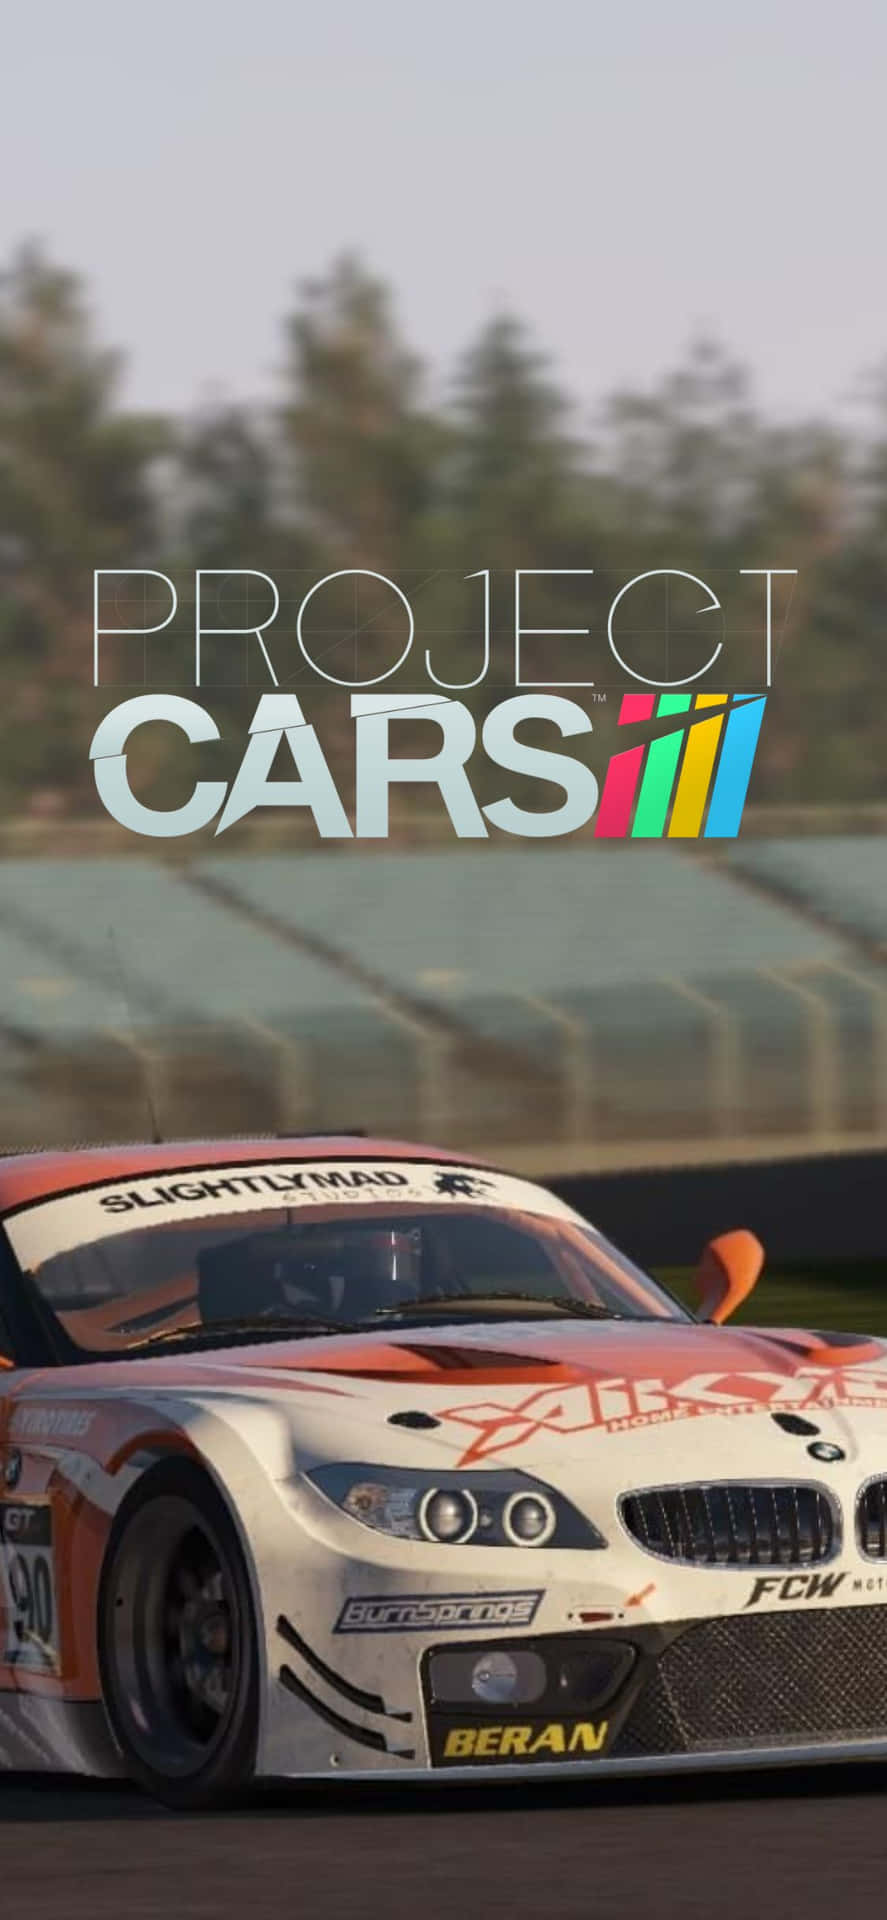 Stunning Project Cars Game Display on iPhone XS